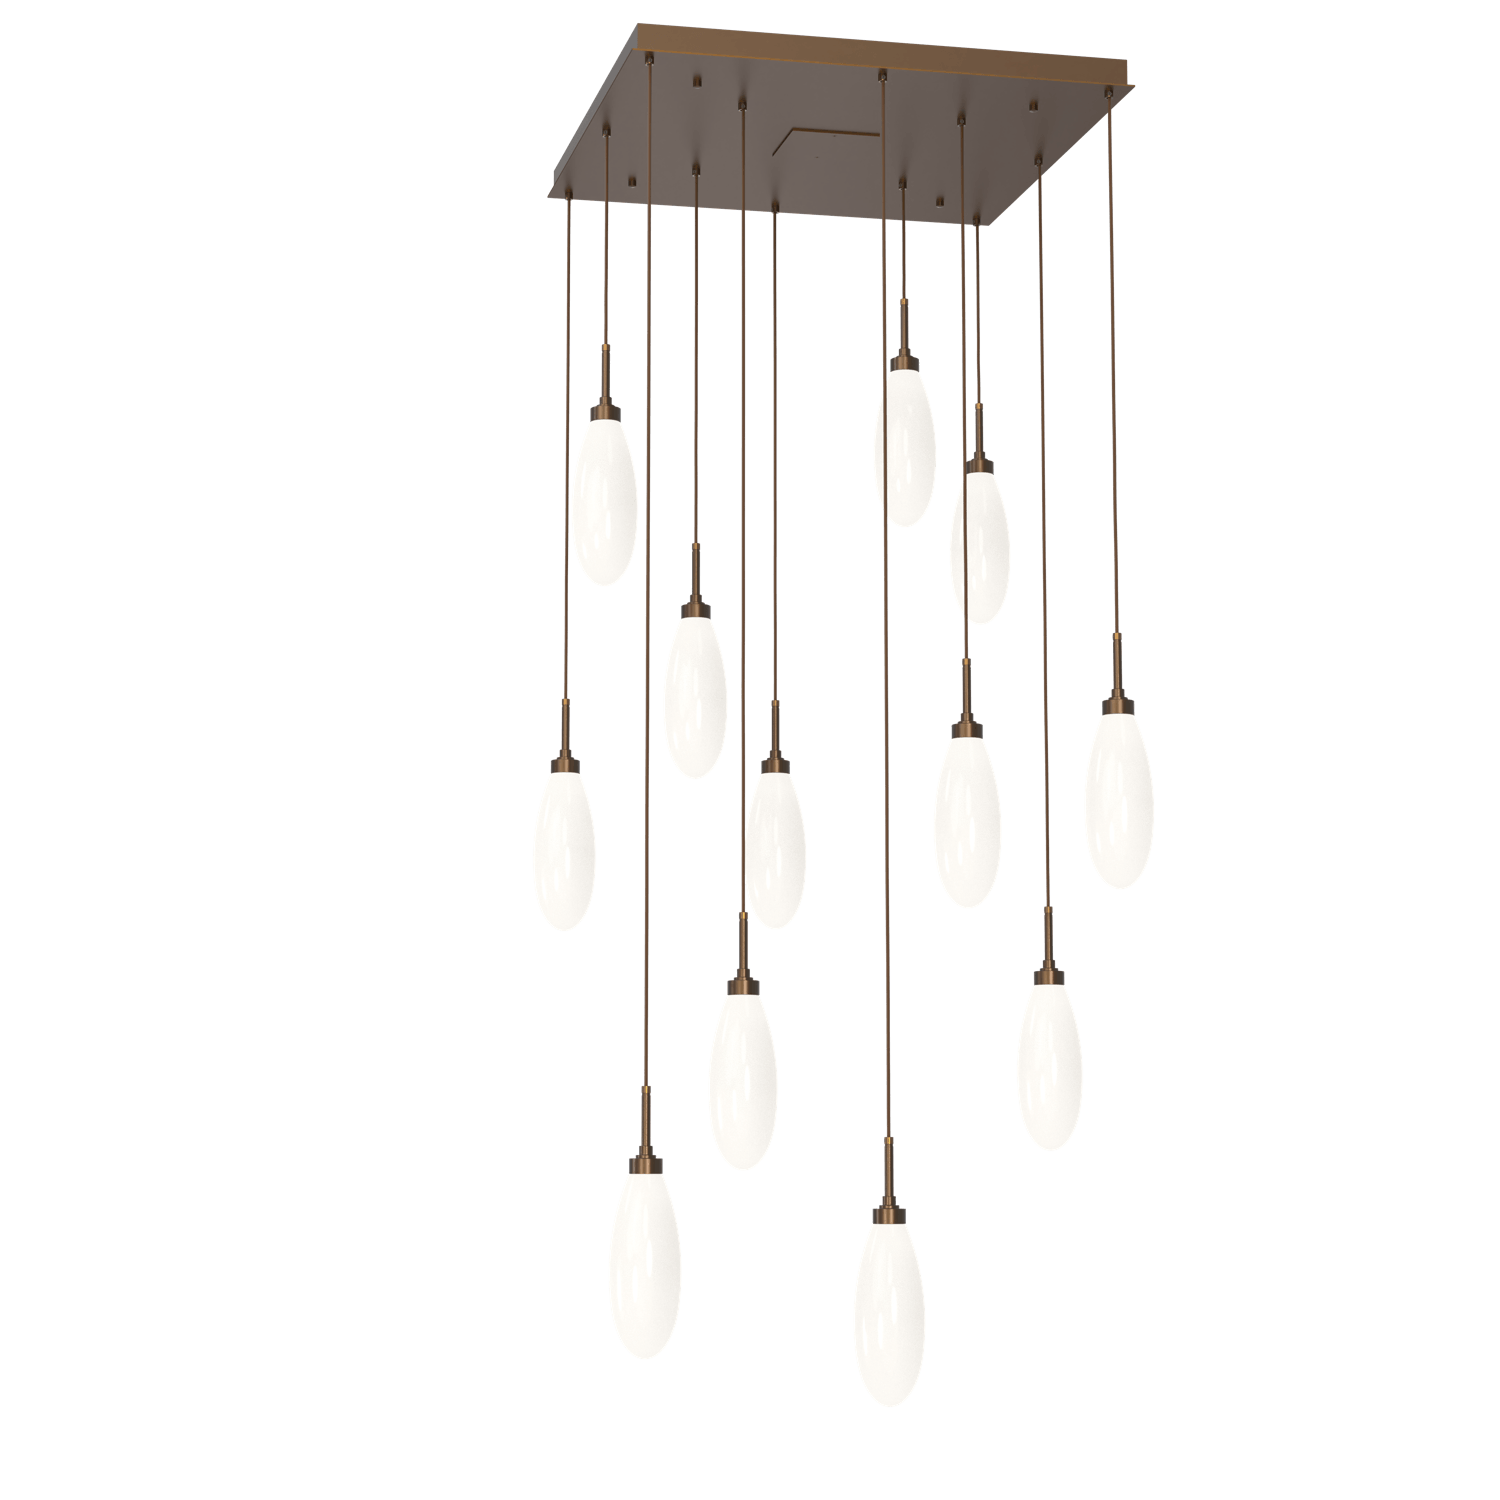 CHB0071-12-FB-WL-LL-Hammerton-Studio-Fiori-12-light-square-pendant-chandelier-with-flat-bronze-finish-and-opal-white-glass-shades-and-LED-lamping